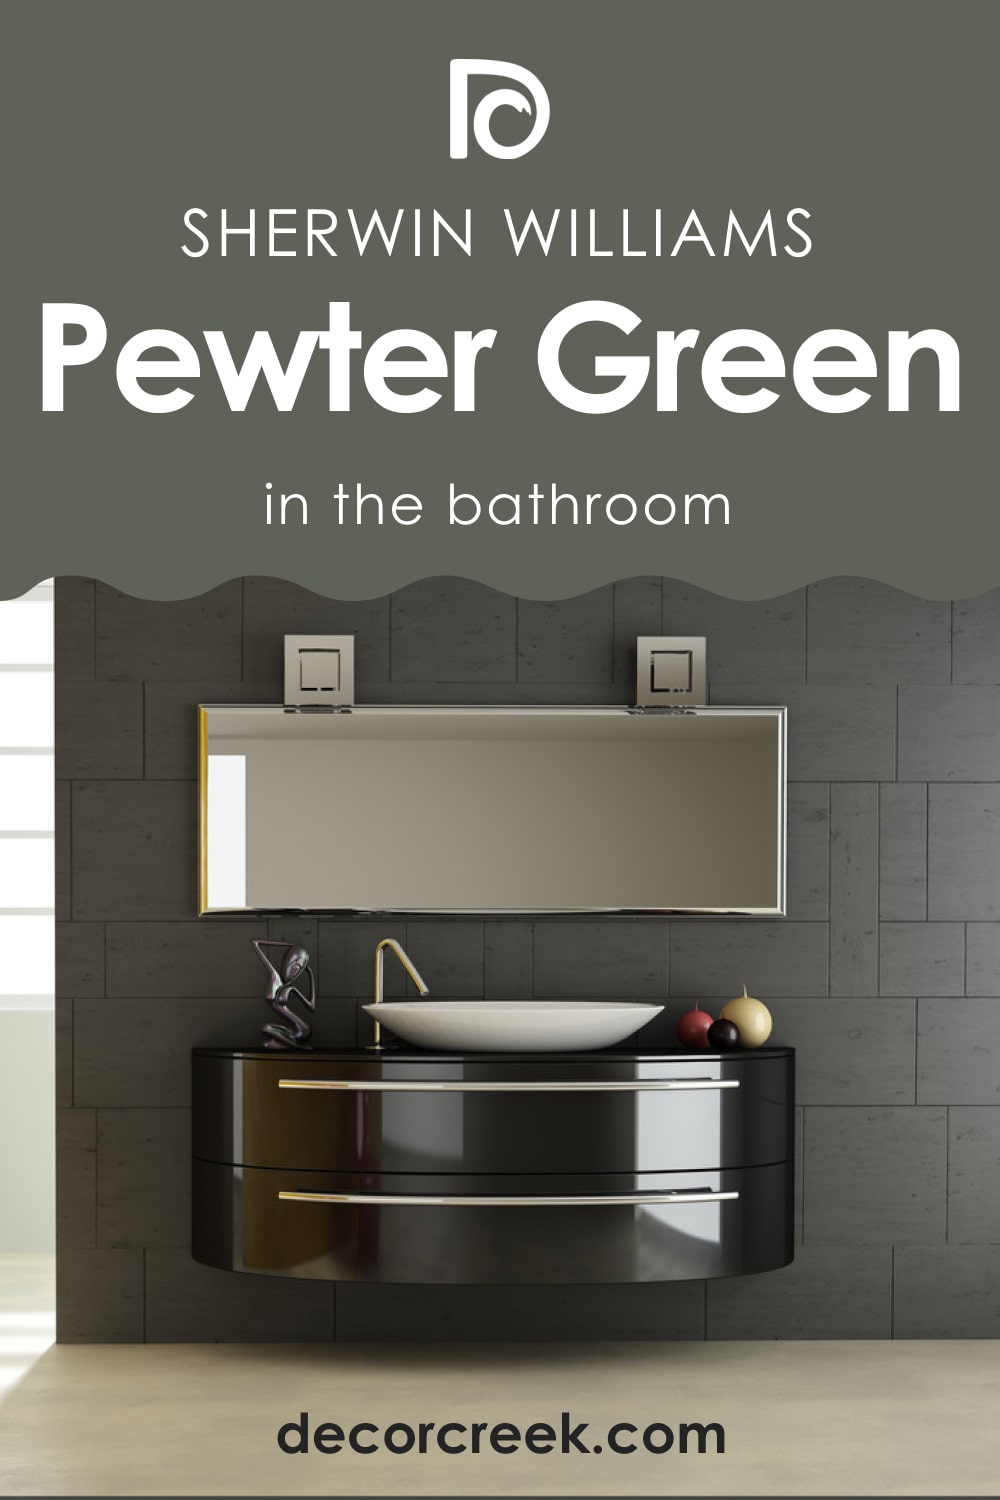 Can I Use Pewter Green Color In My Bathroom?